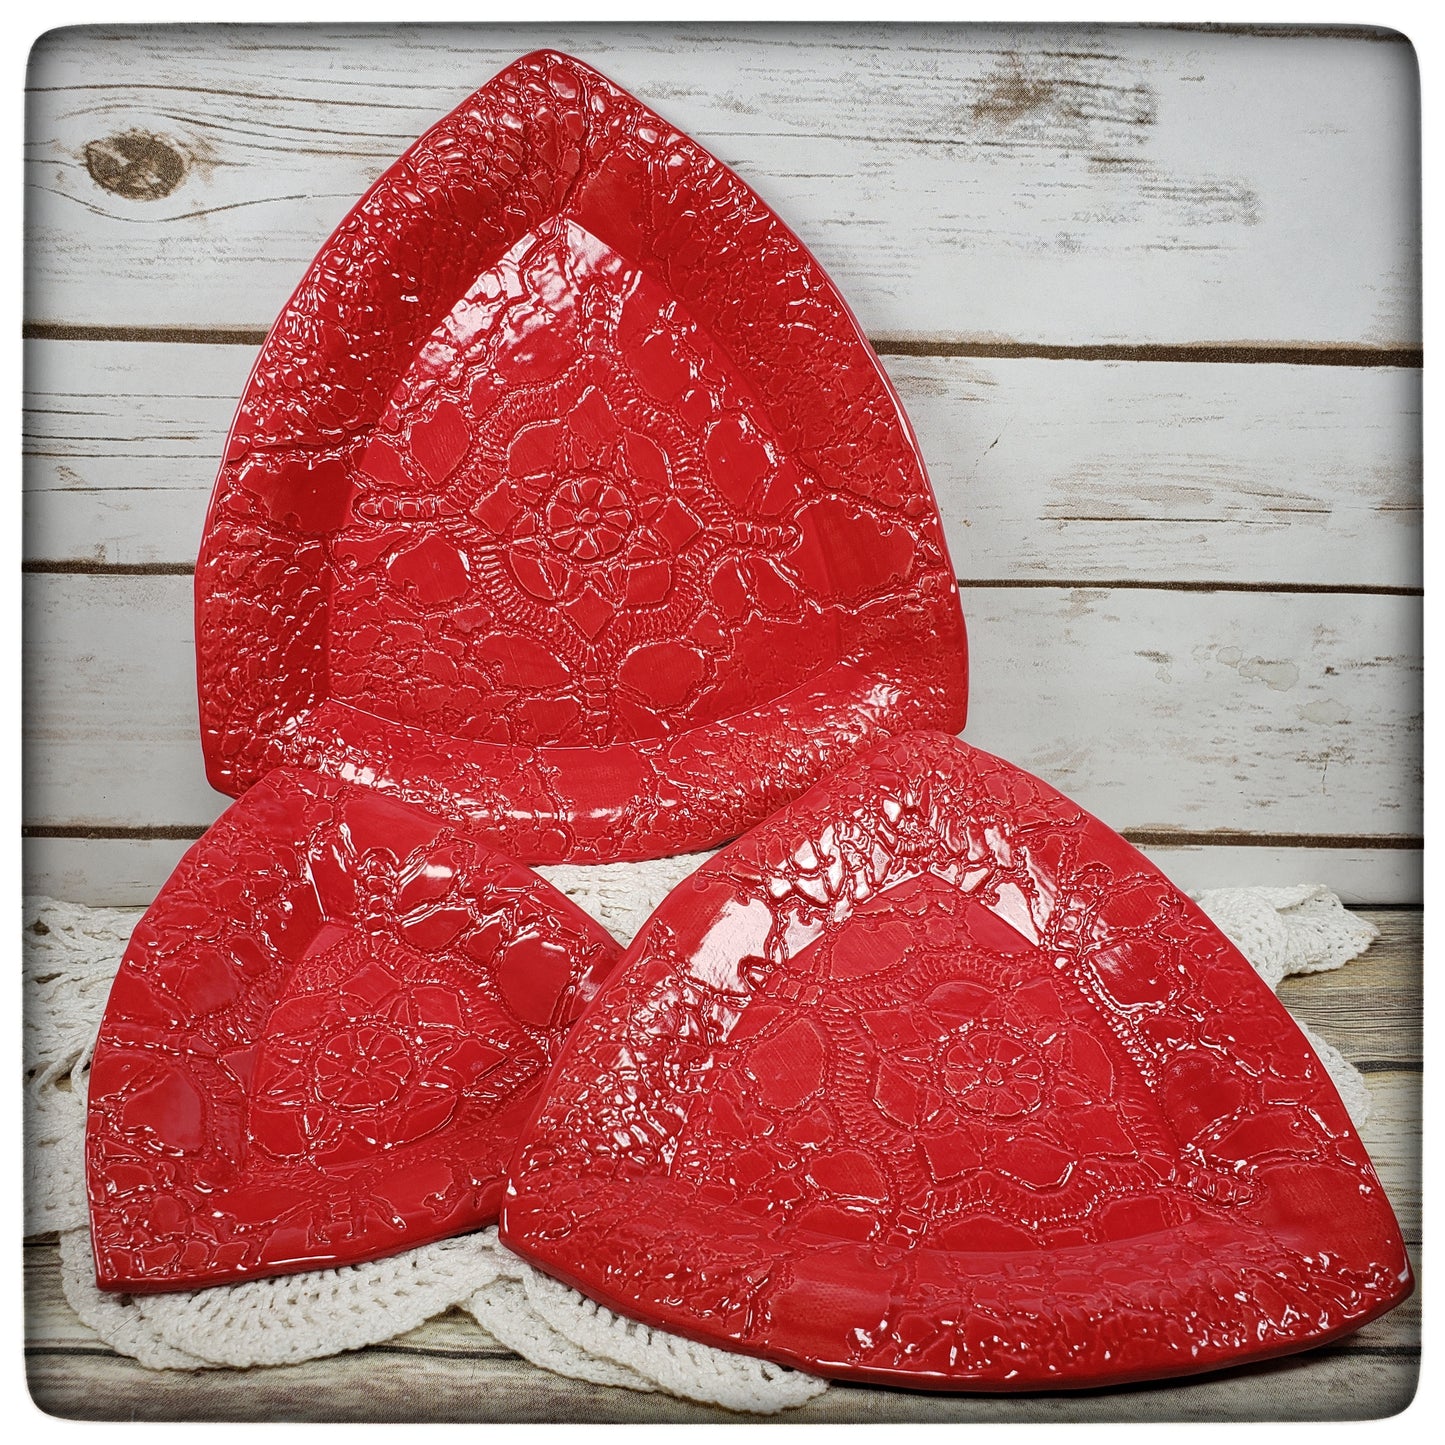 Crocheted Doily triangle dish (Marie style; 7 inch)